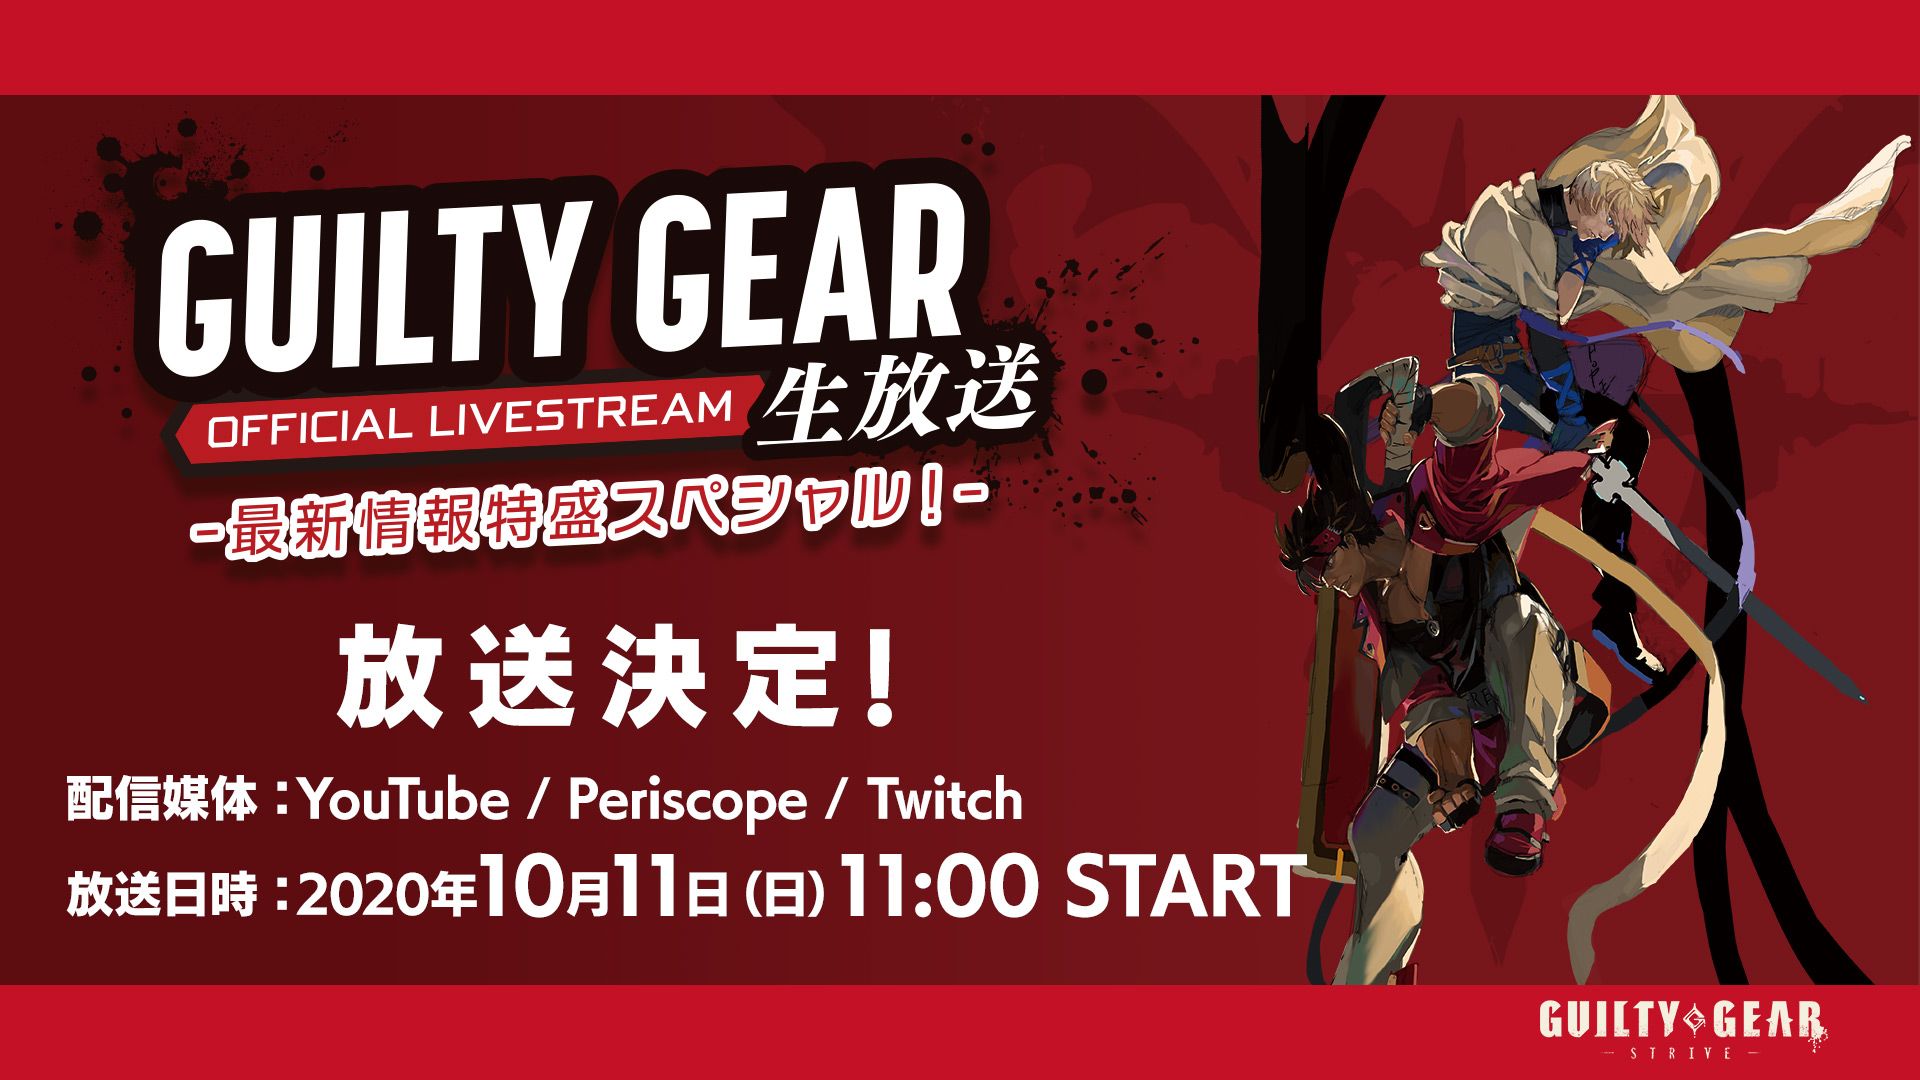 Guilty Gear Strive event coming October 11